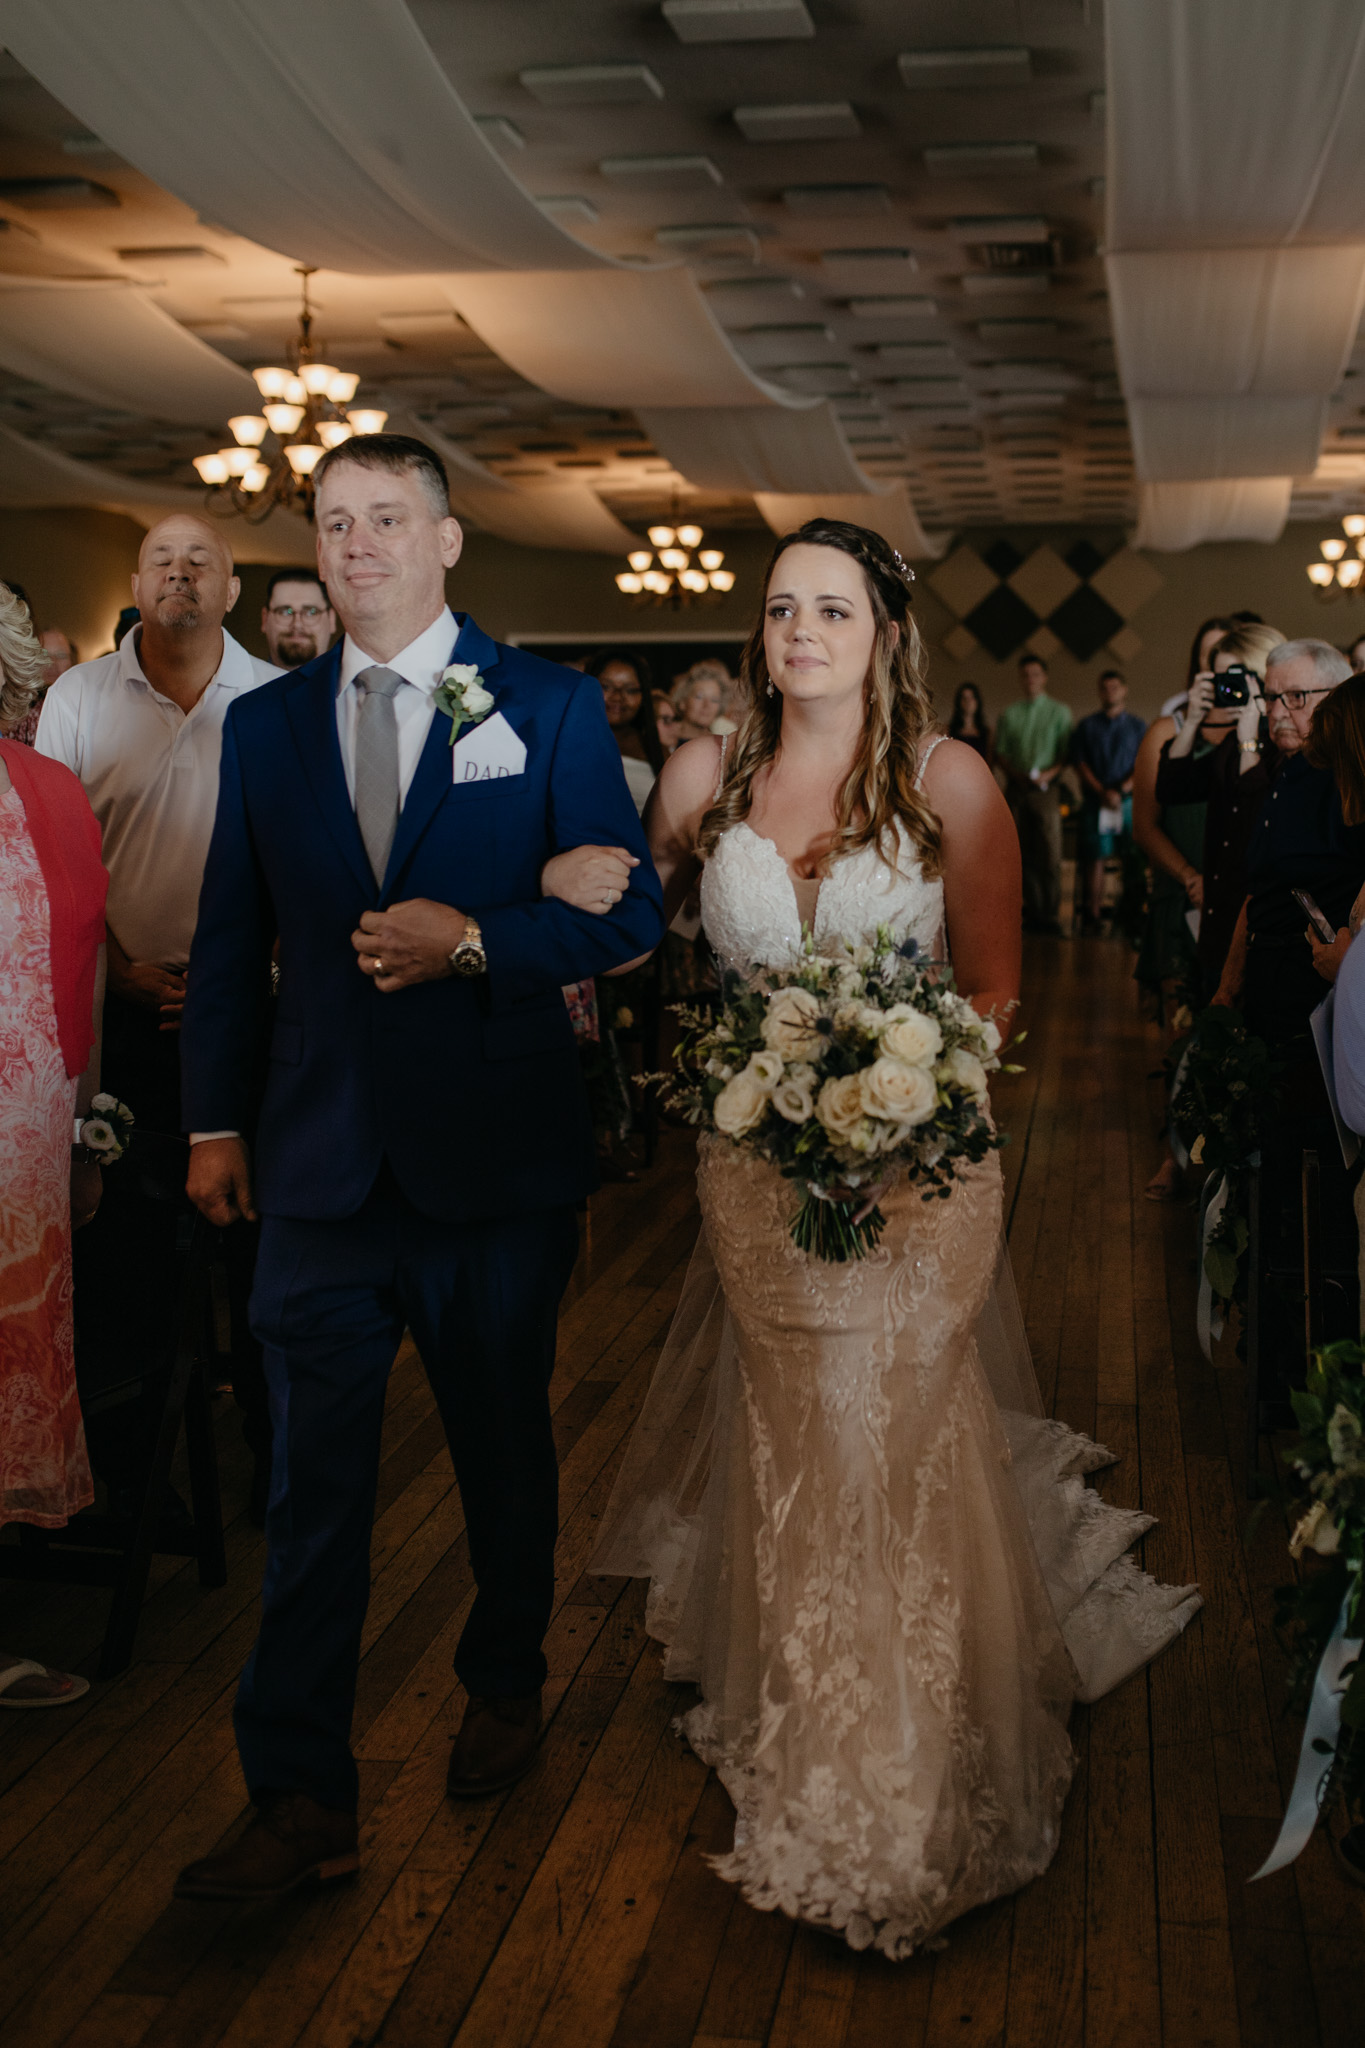 The bride walks down the aisle at her Indiana wedding